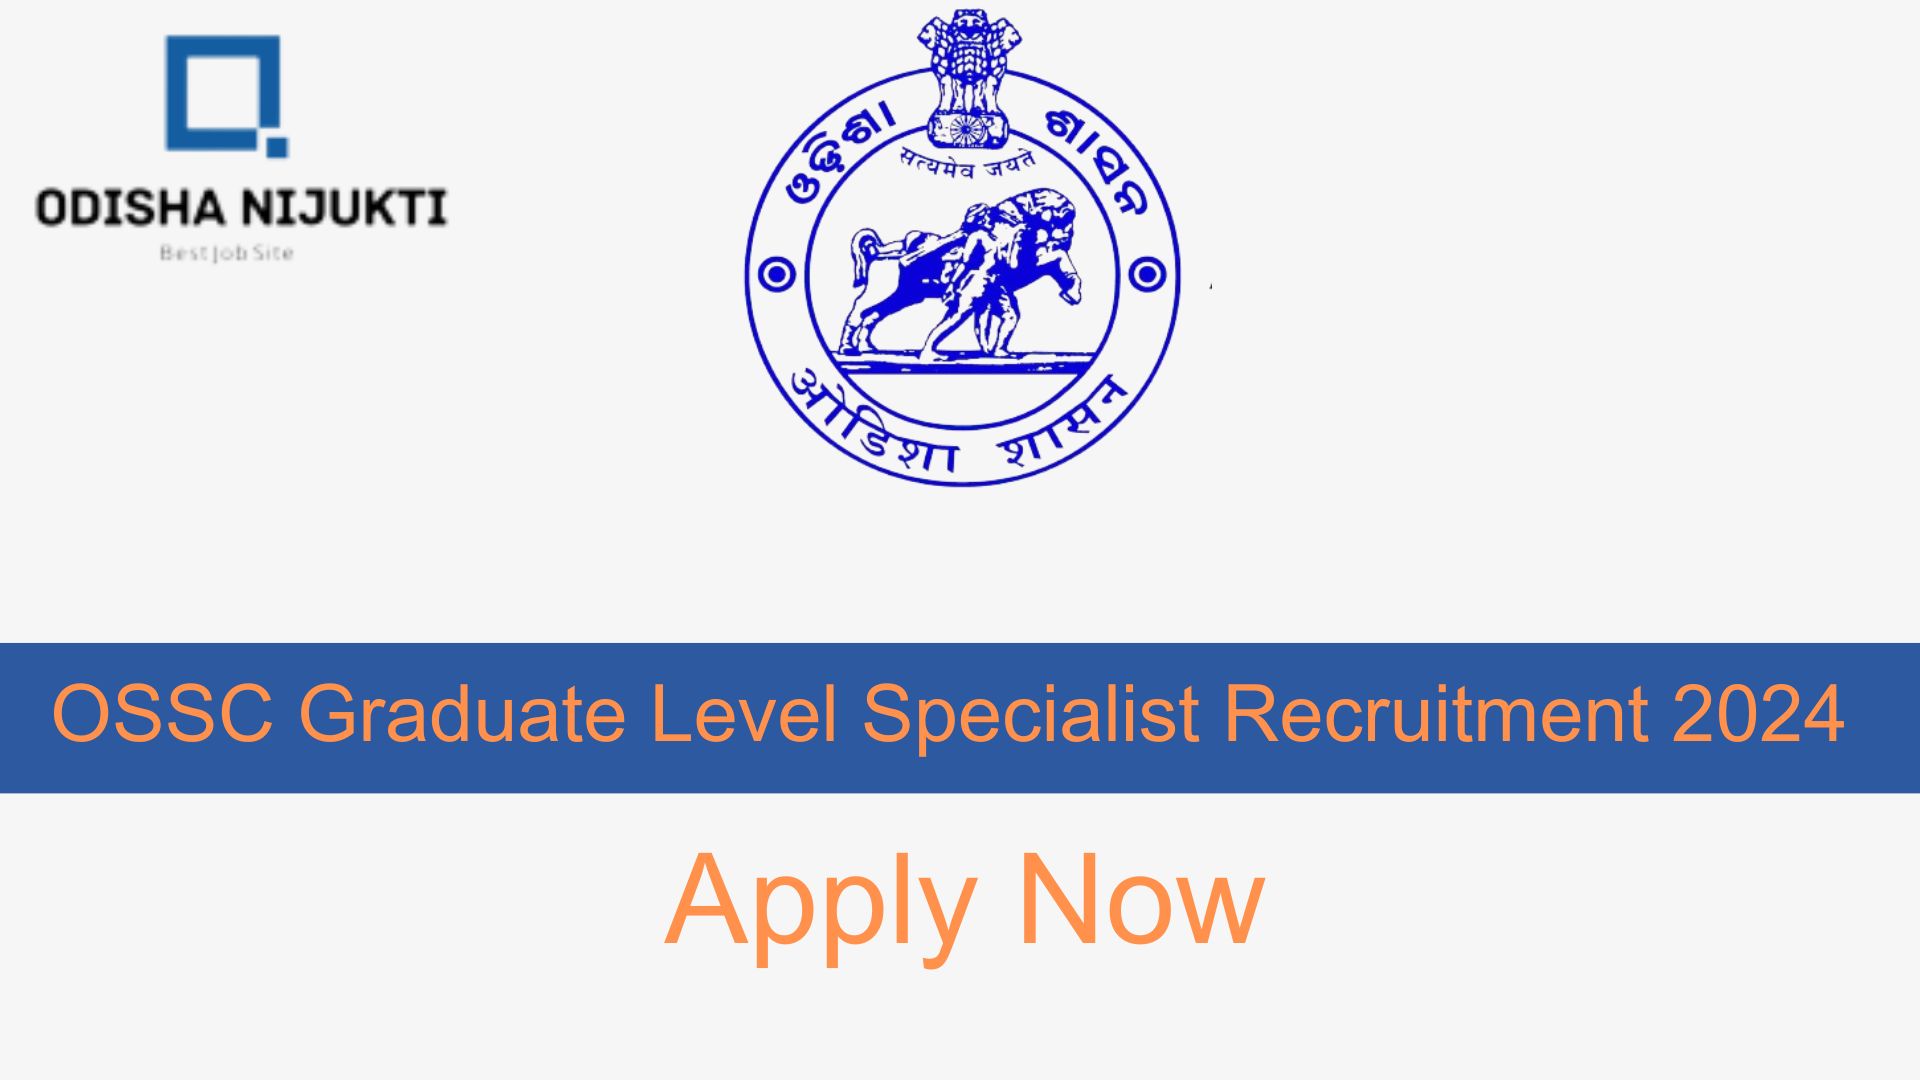 OSSC-Graduate-Level-Specialist-Recruitment-2024---Apply-Now-for-Various-Specialist-Posts-